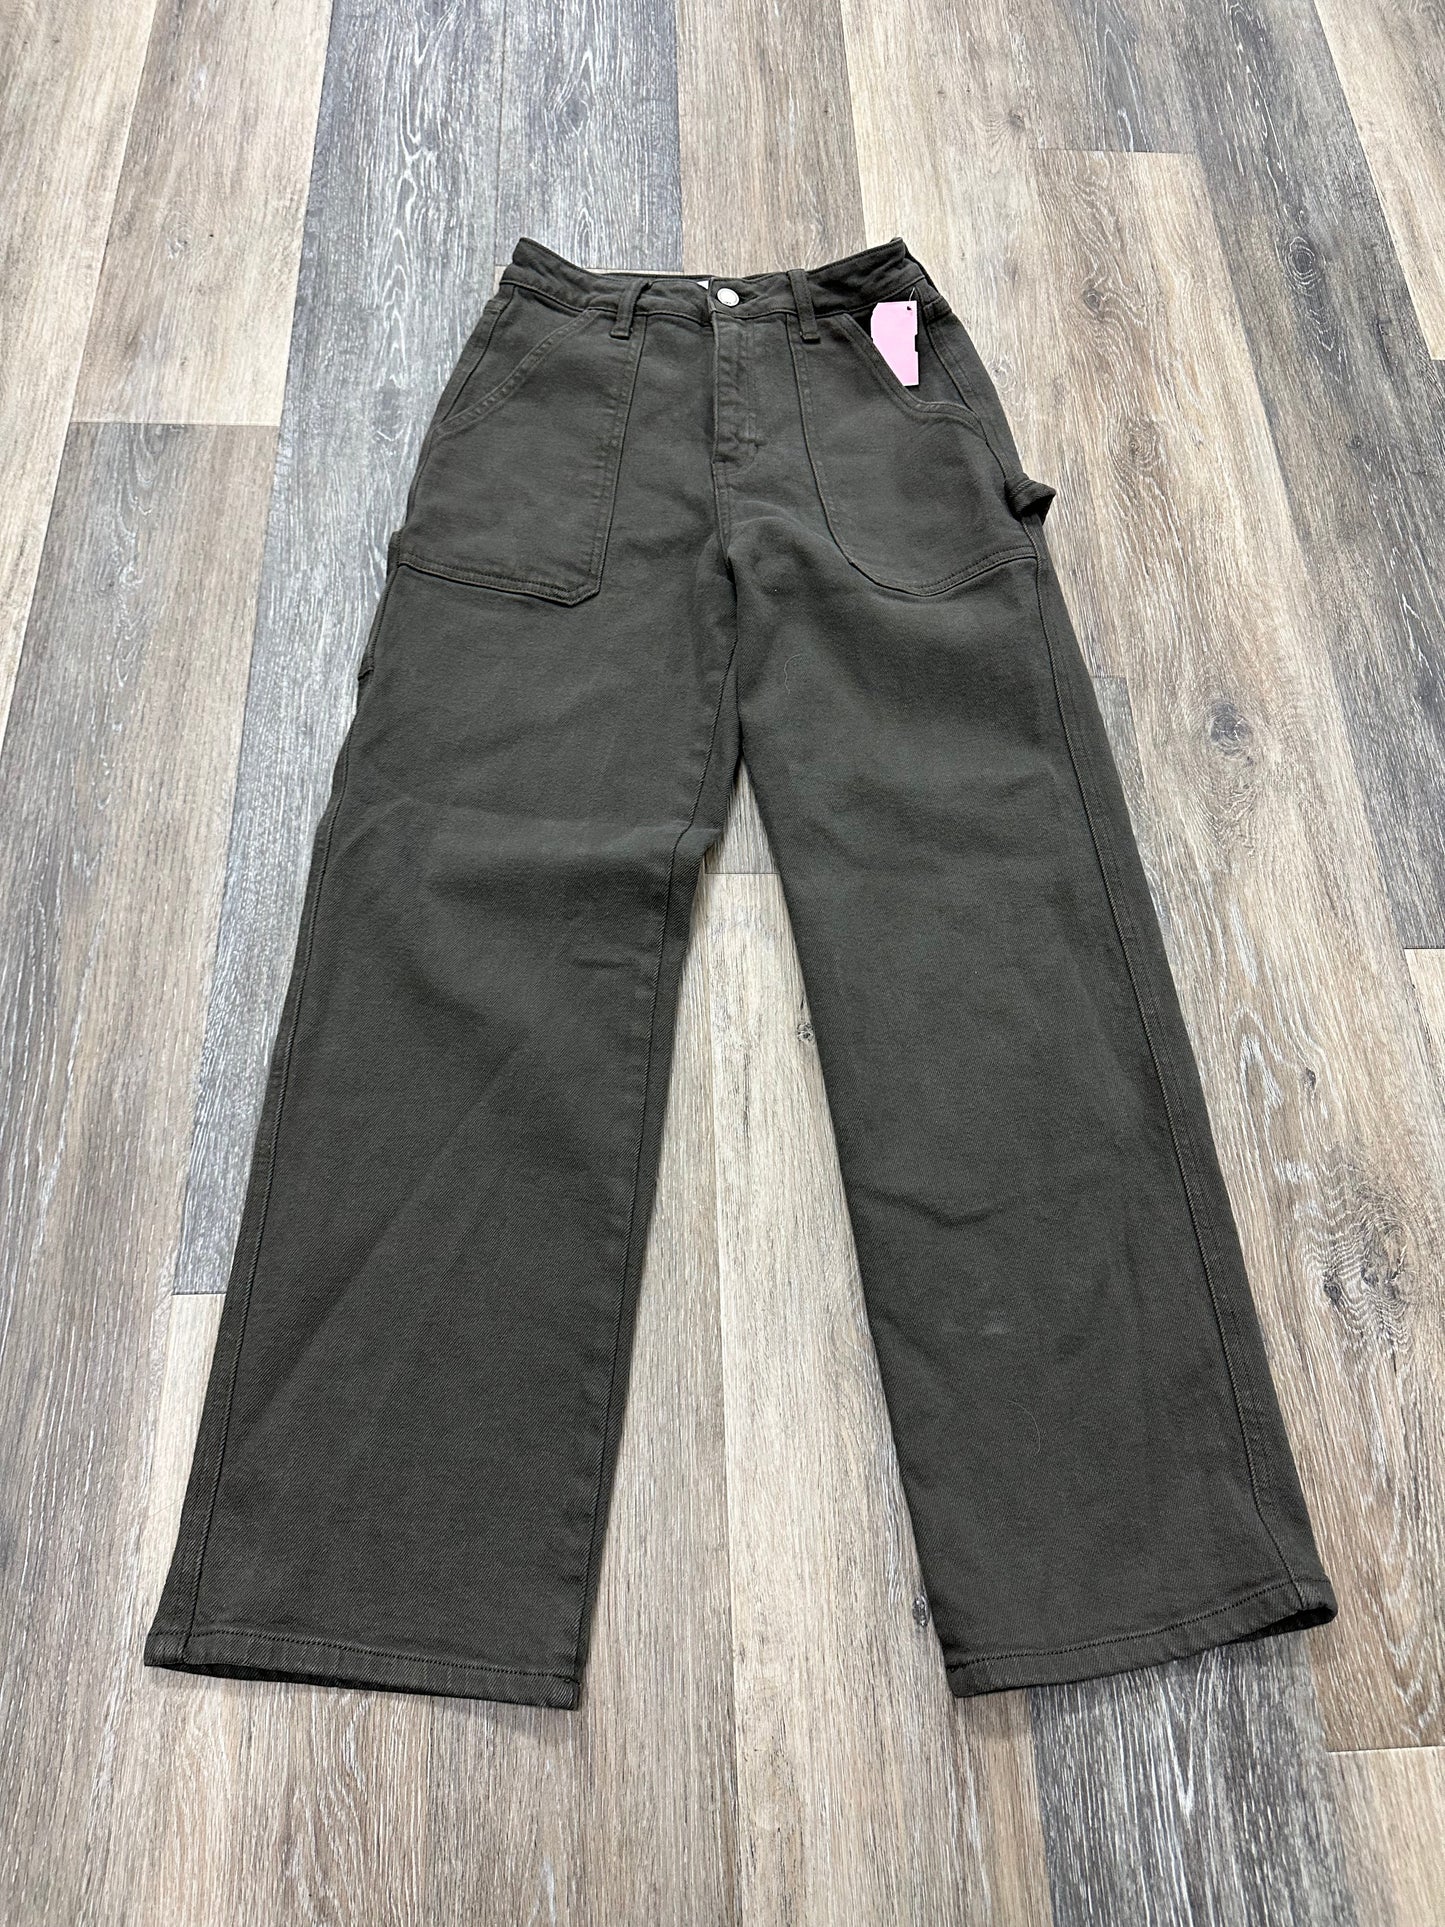 Pants Cargo & Utility By Just Black  Size: 2